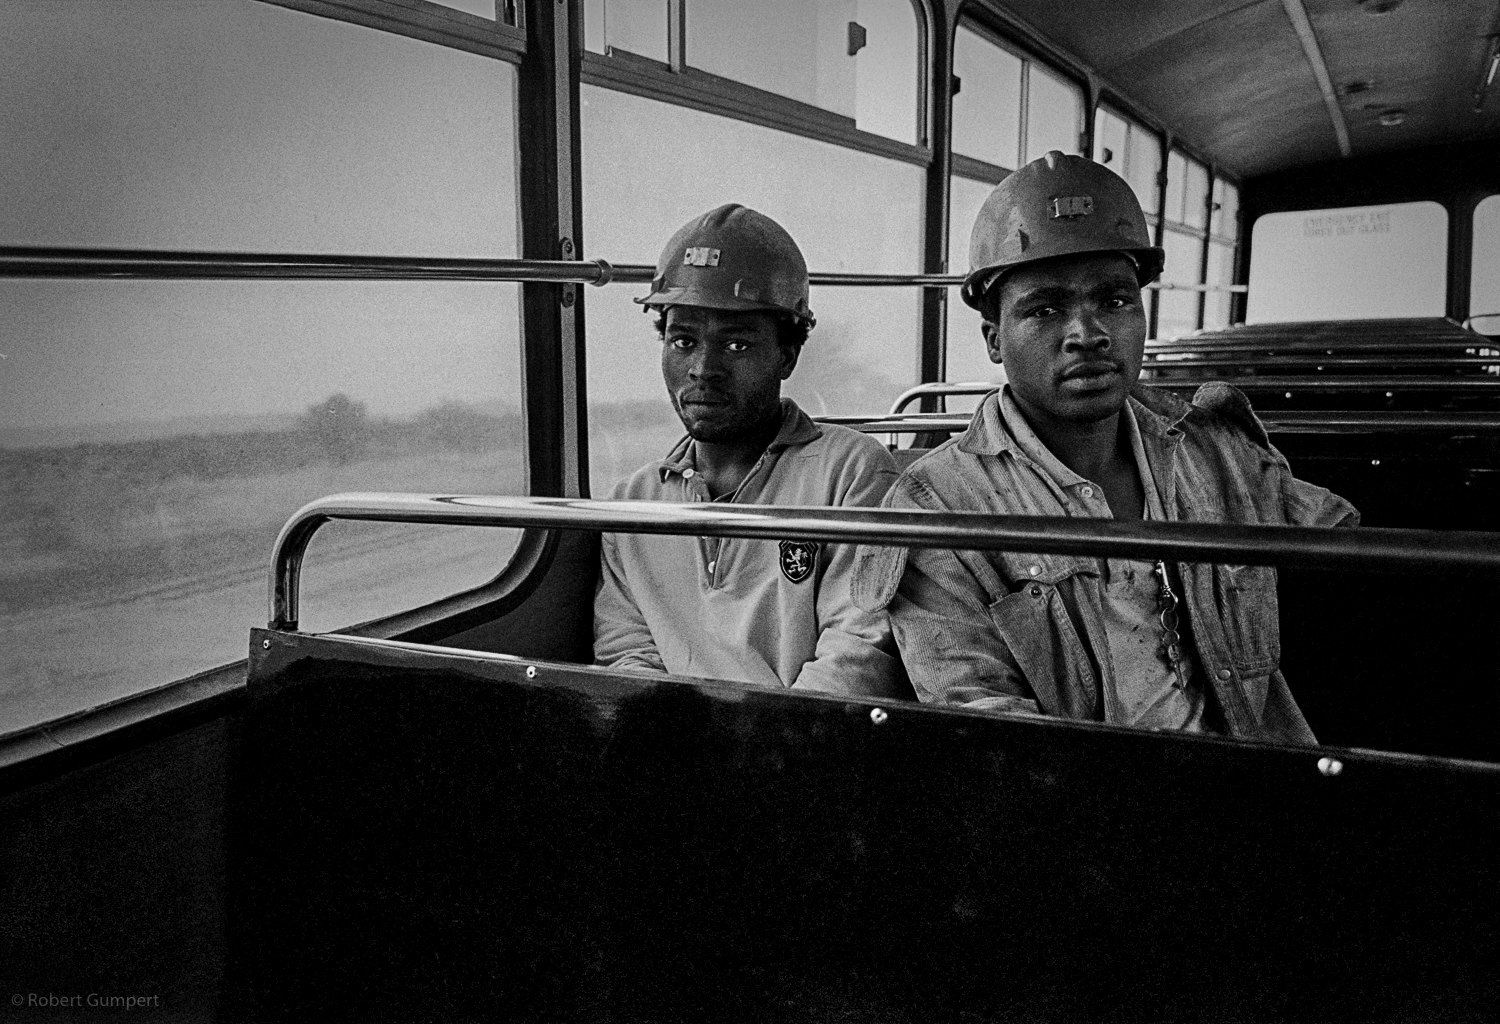  1991: Miners on their way to work.  South Africa BOP, South Africa, the "homeland" Bophuthatswana Copyright Robert Gumpert 